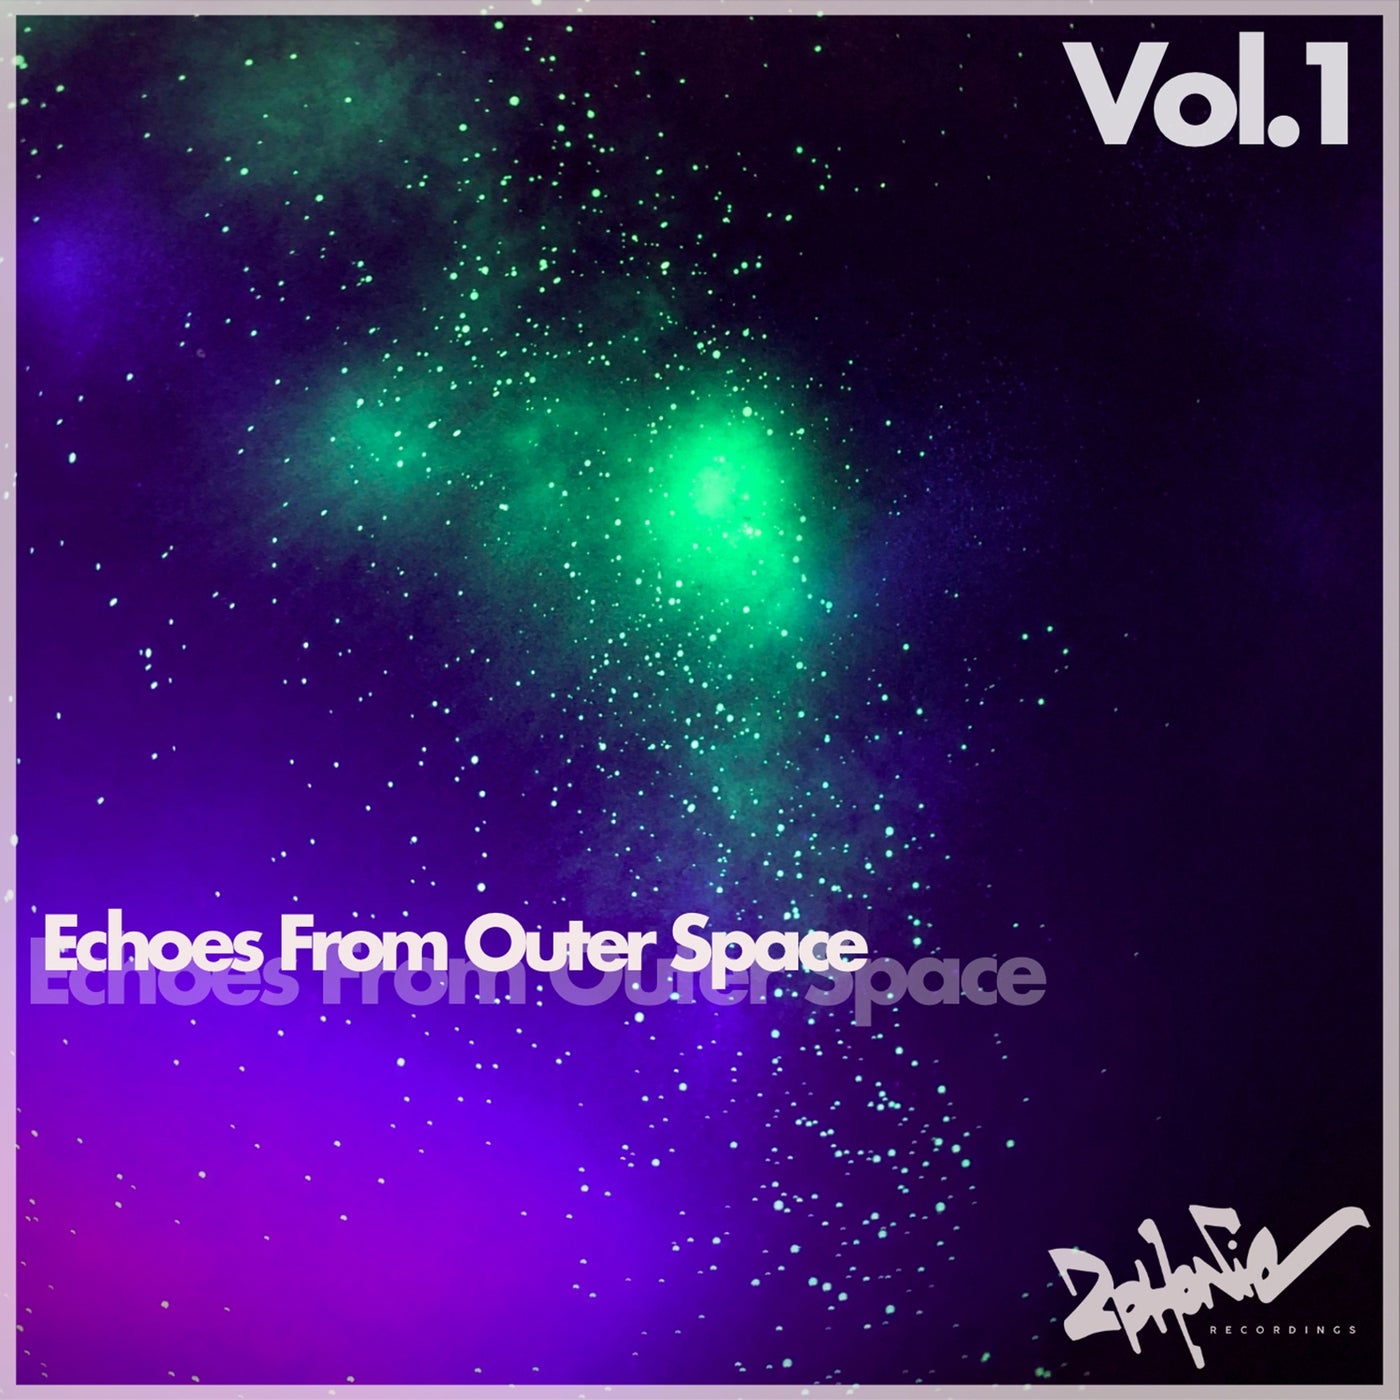 Echoes from Outer Space, Vol. 1